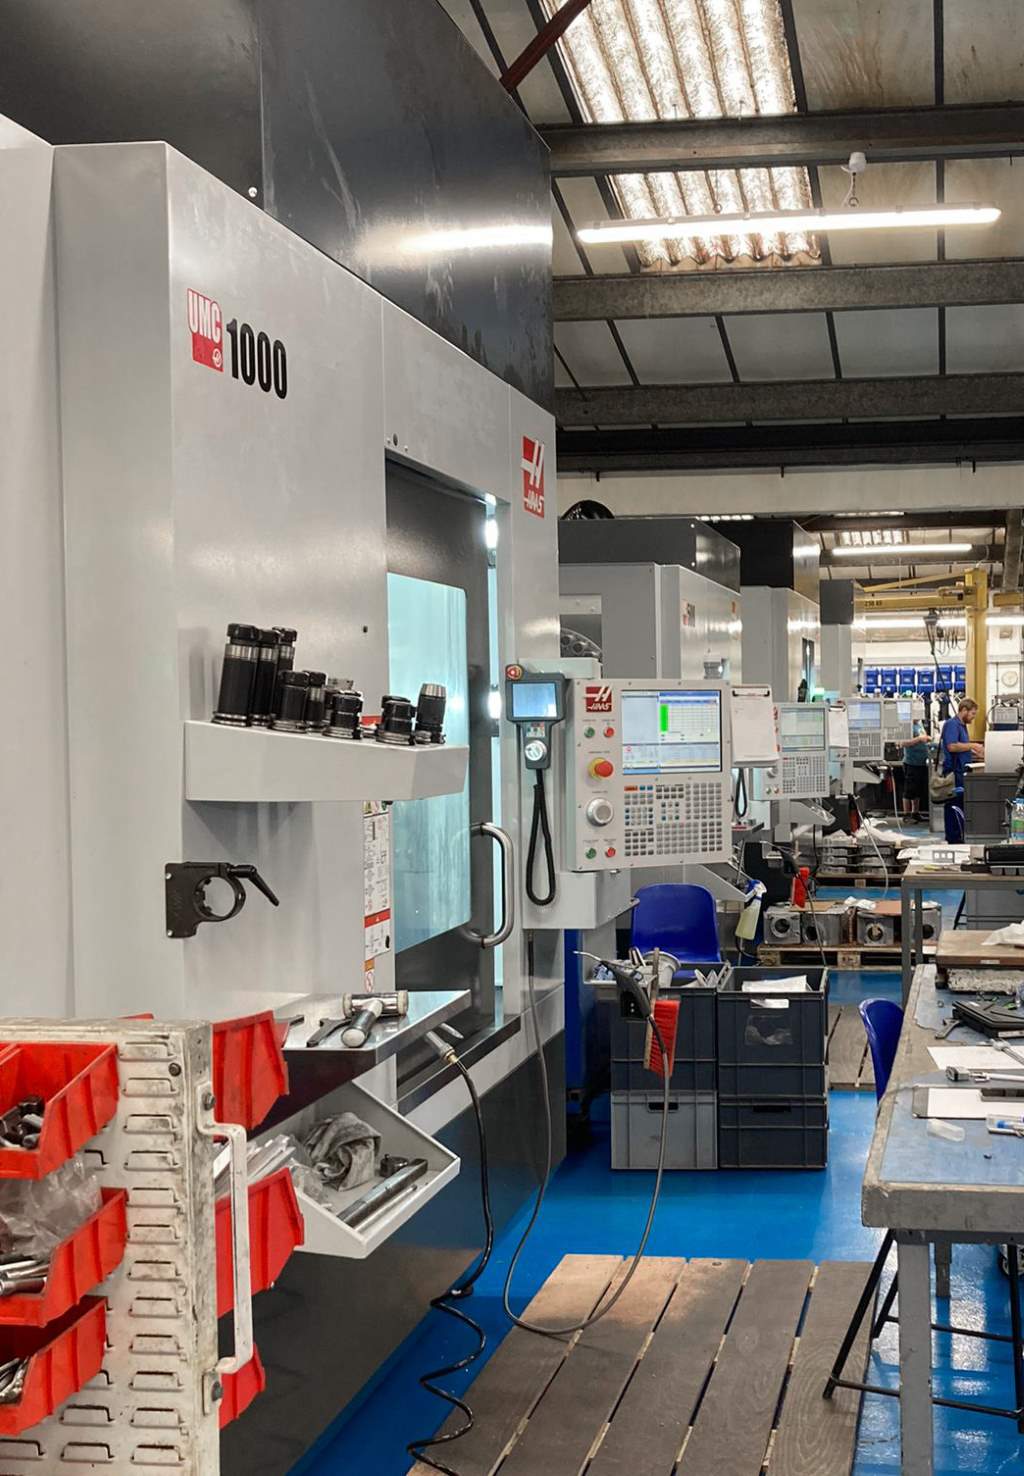 The compact footprint of the Haas UMC machines enables more to be placed on the shopfloor at Maycast-Nokes 